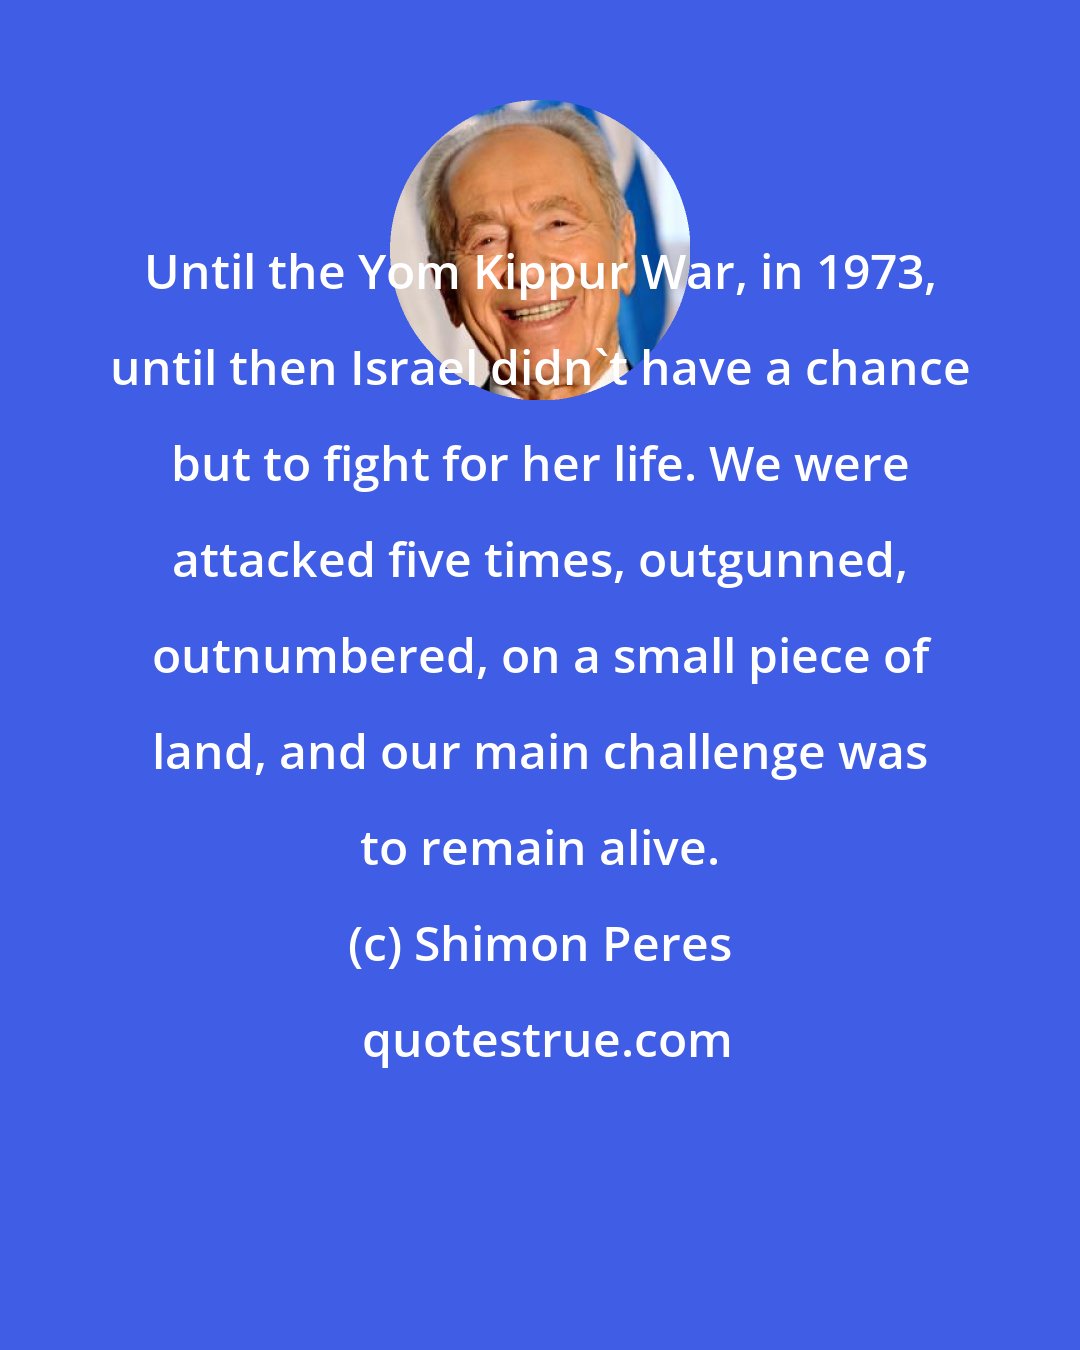 Shimon Peres: Until the Yom Kippur War, in 1973, until then Israel didn't have a chance but to fight for her life. We were attacked five times, outgunned, outnumbered, on a small piece of land, and our main challenge was to remain alive.